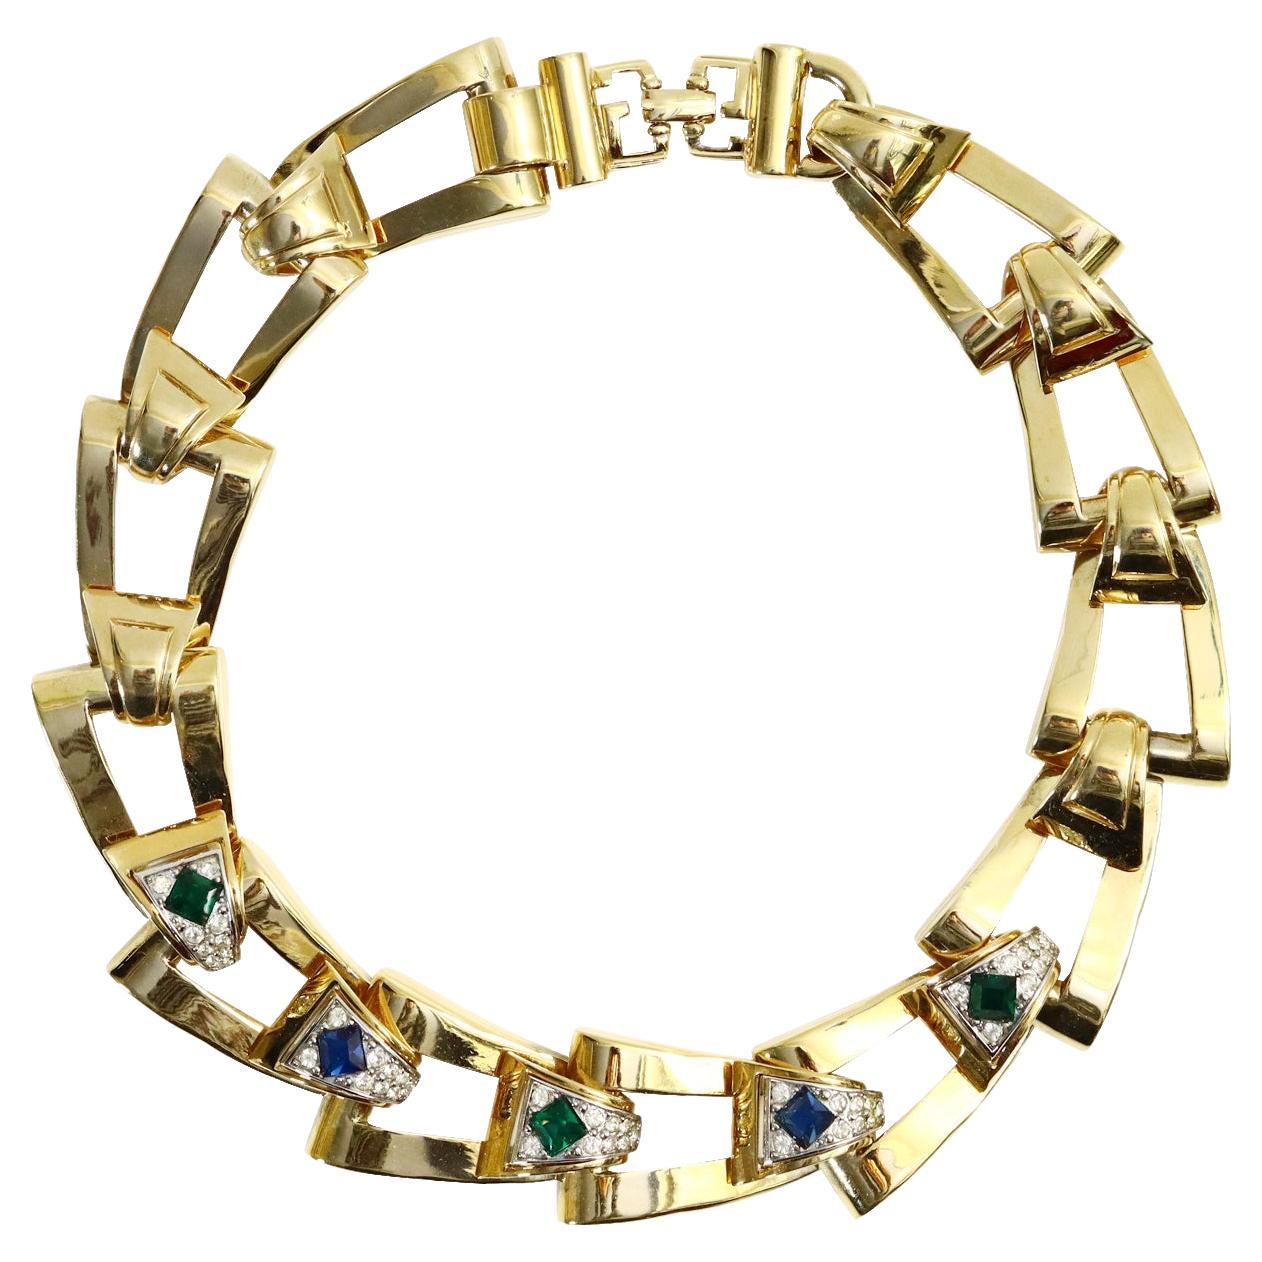 Vintage Givenchy Diamante and Gold Tone Link Necklace Circa 1980s. A majority of the links have a piece of gold with diamante and then a crystal in either blue, green or red in the middle. A heavy and substantial necklace. There is a bracelet on